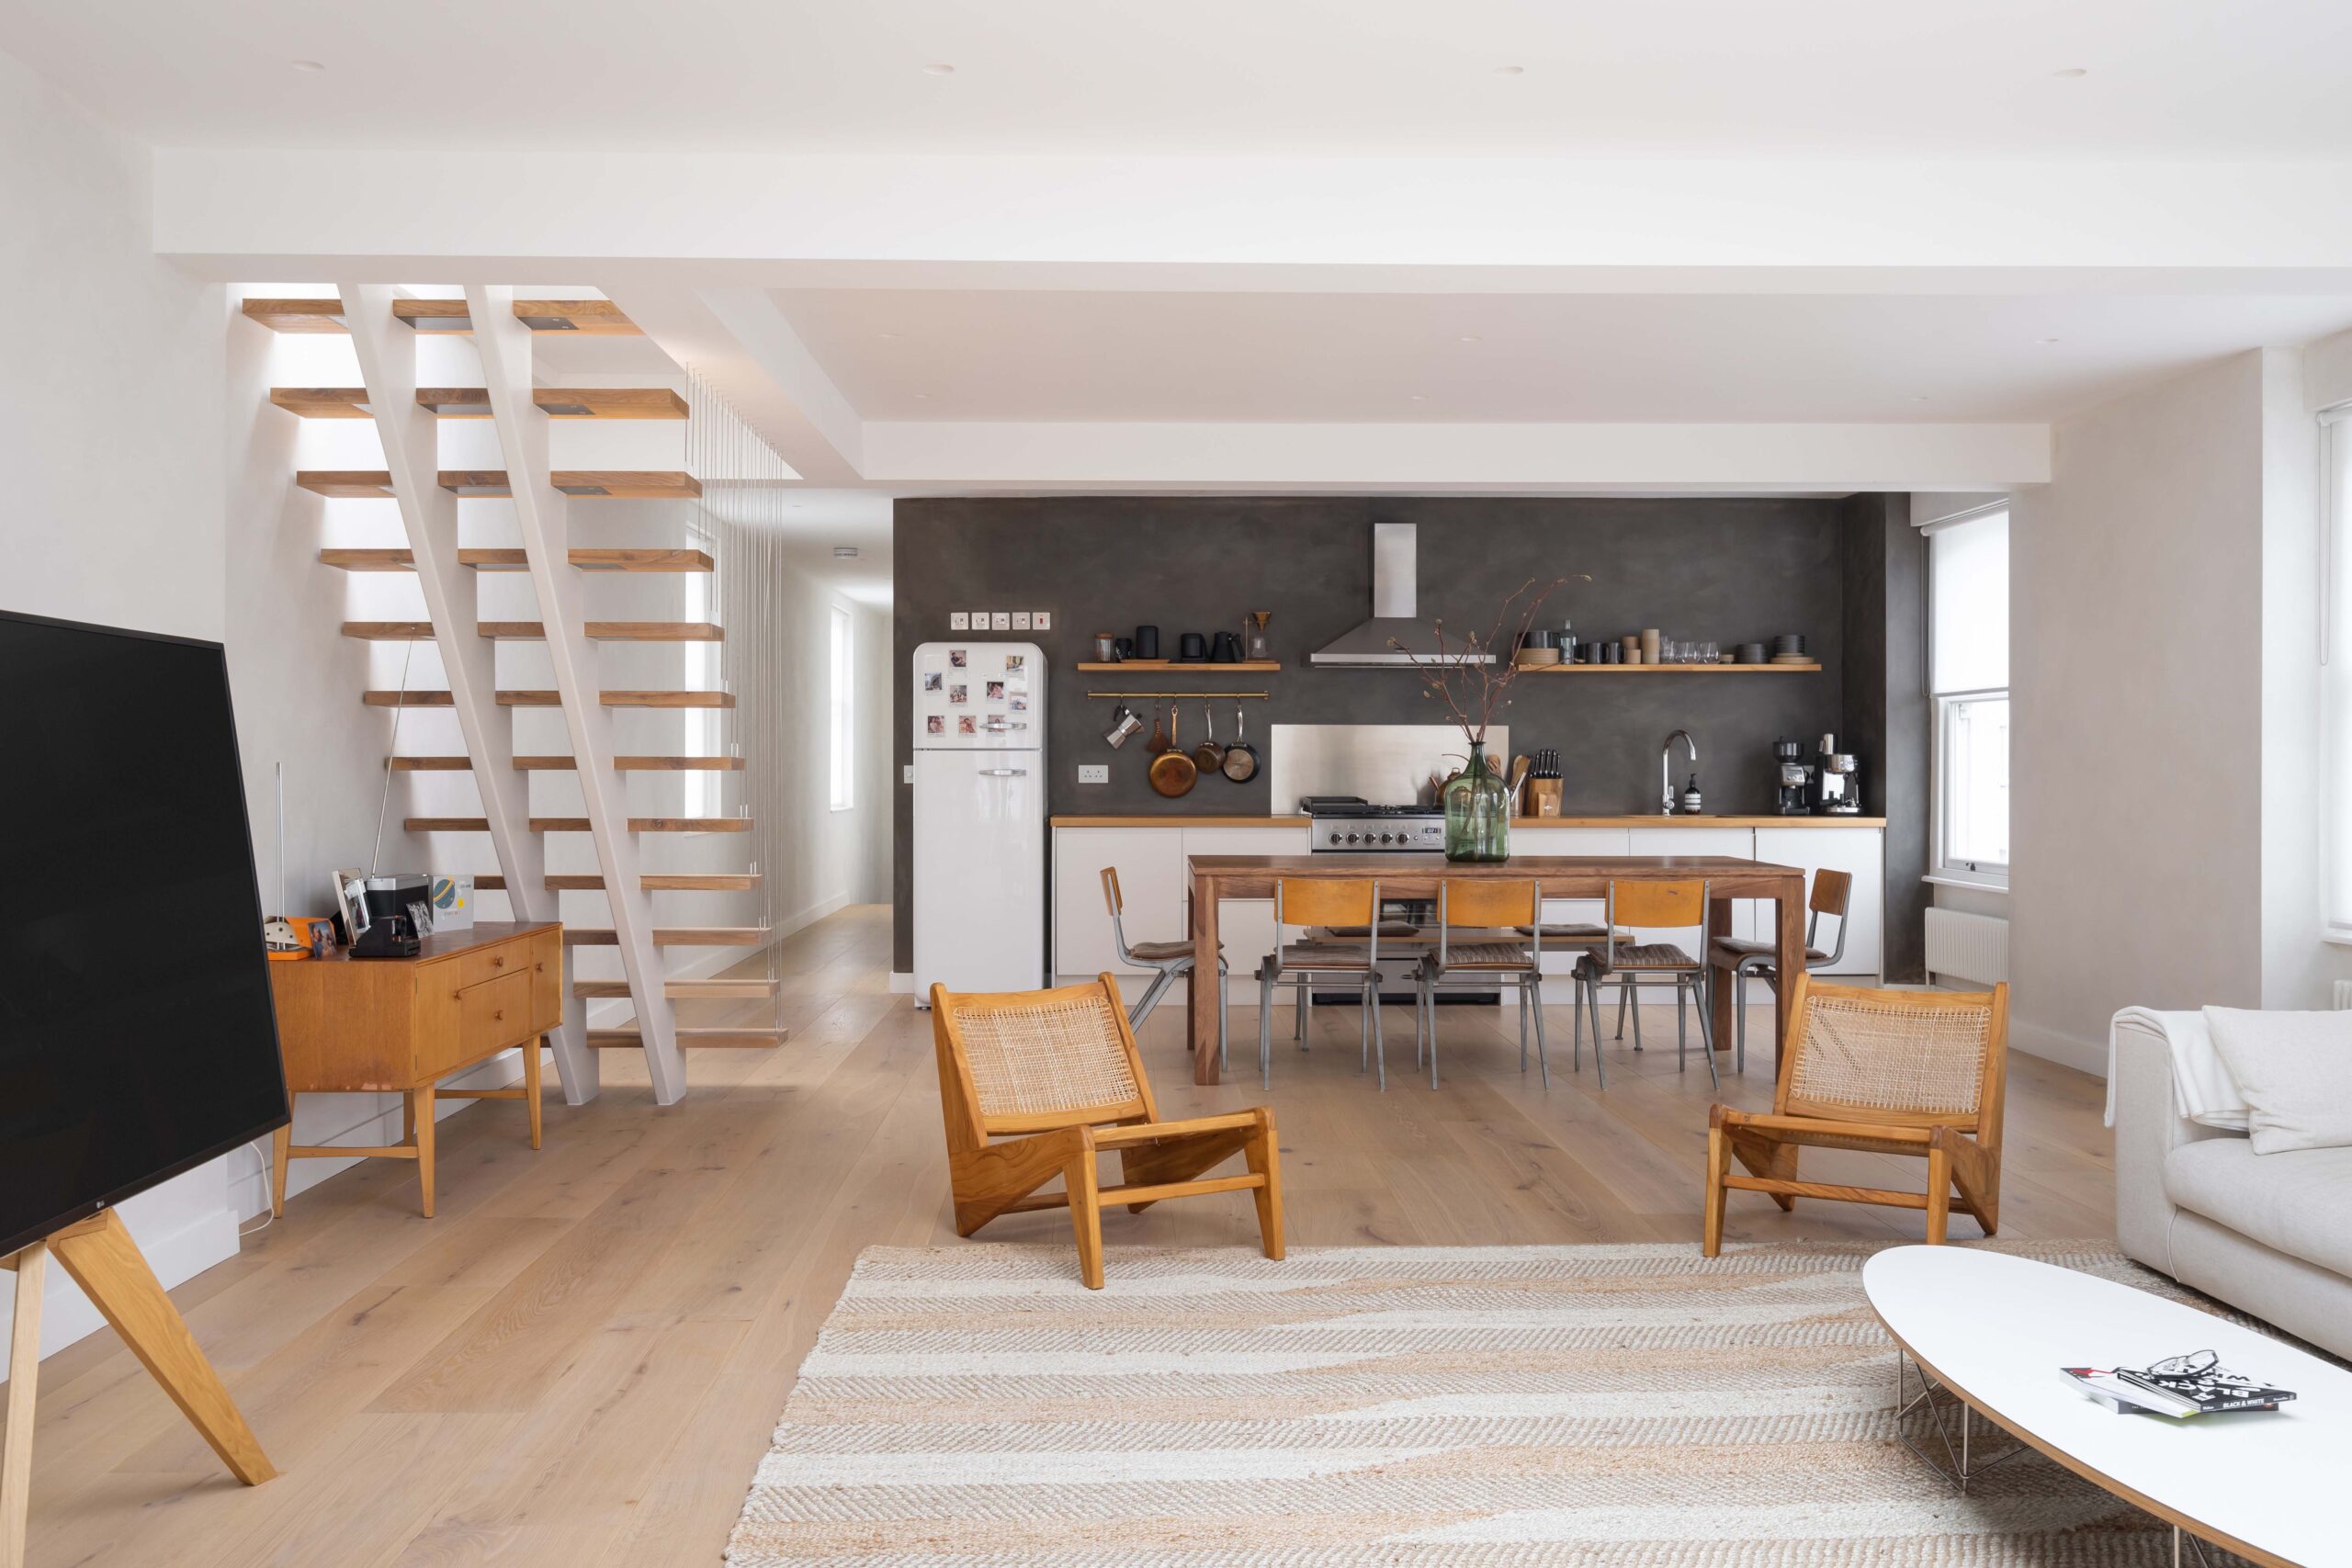 For Sale: Westbourne Grove Notting Hill W11 open-plan kitchen and living room with Scandi interior design